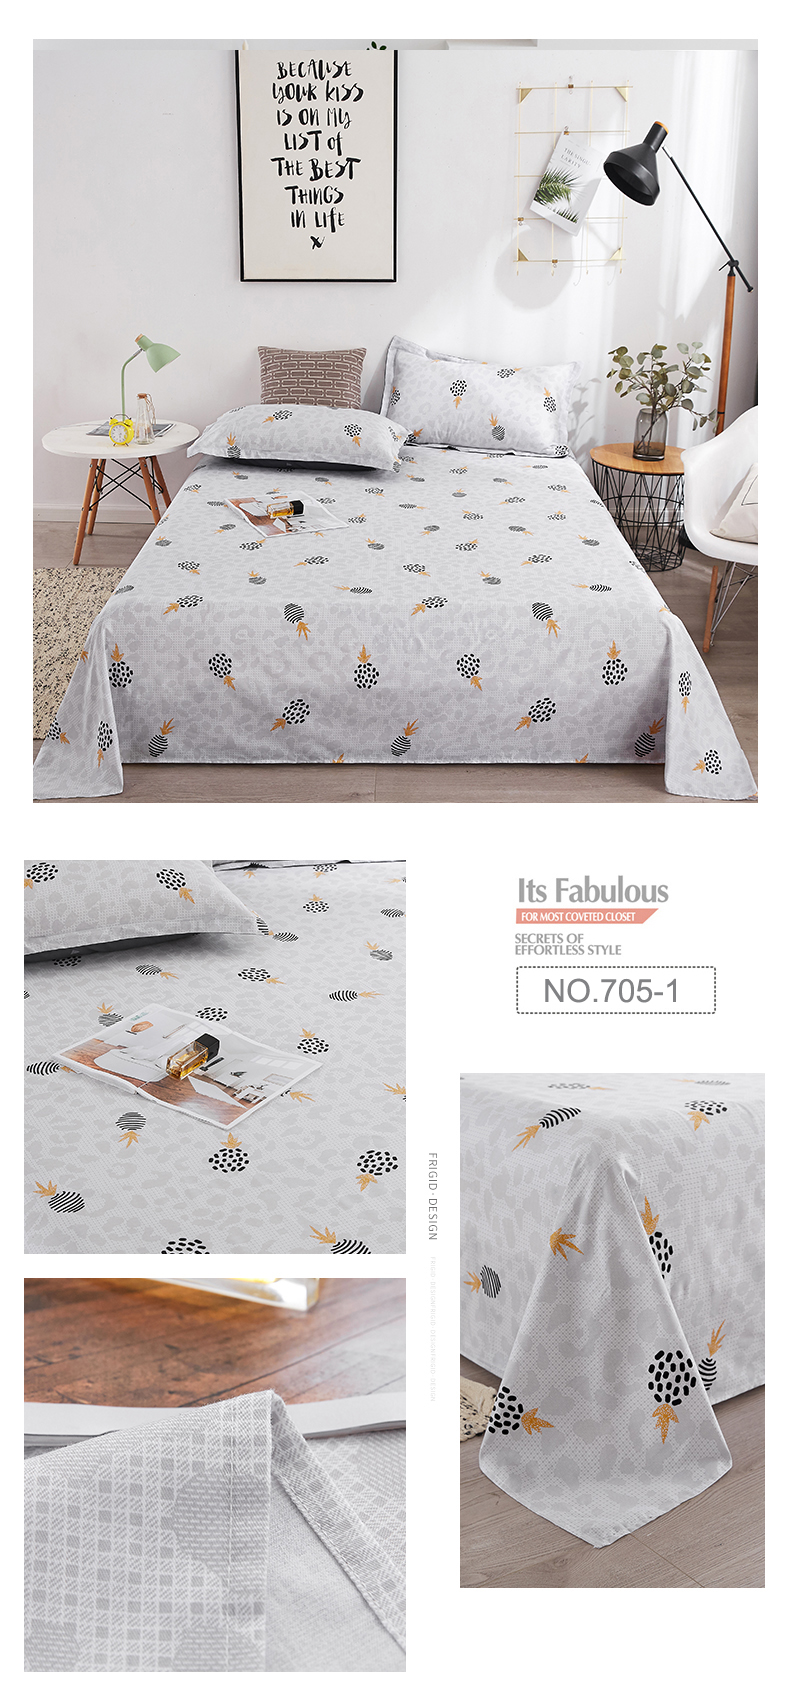 Cotton Printed Light Yellow King Bed Linen Bed Sheet Set